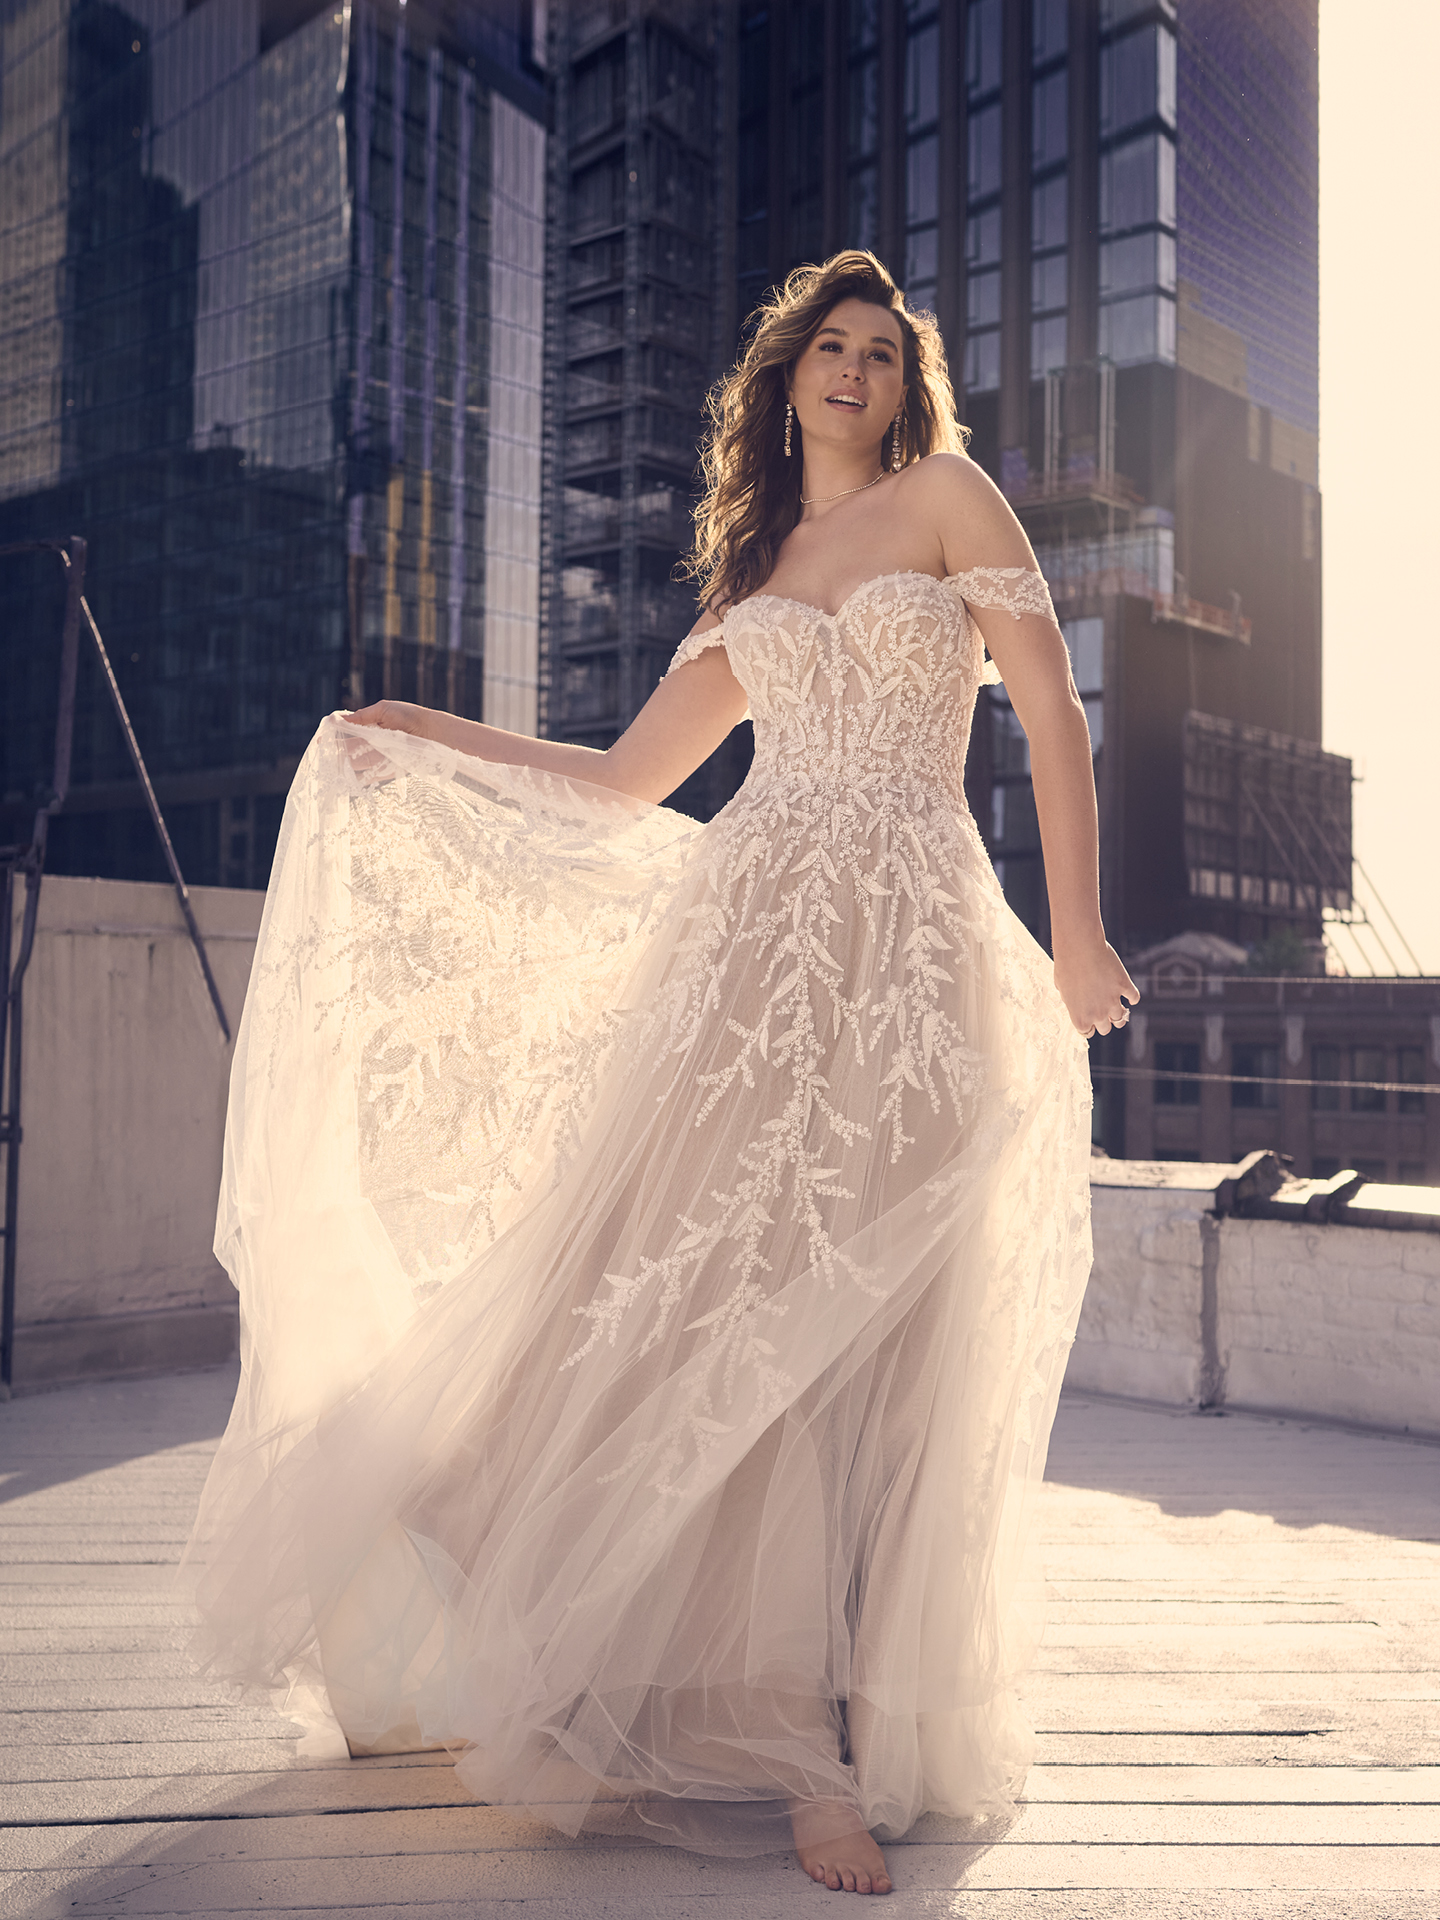 Bride In Beaded Wedding Dress Called Oriana By Maggie Sottero